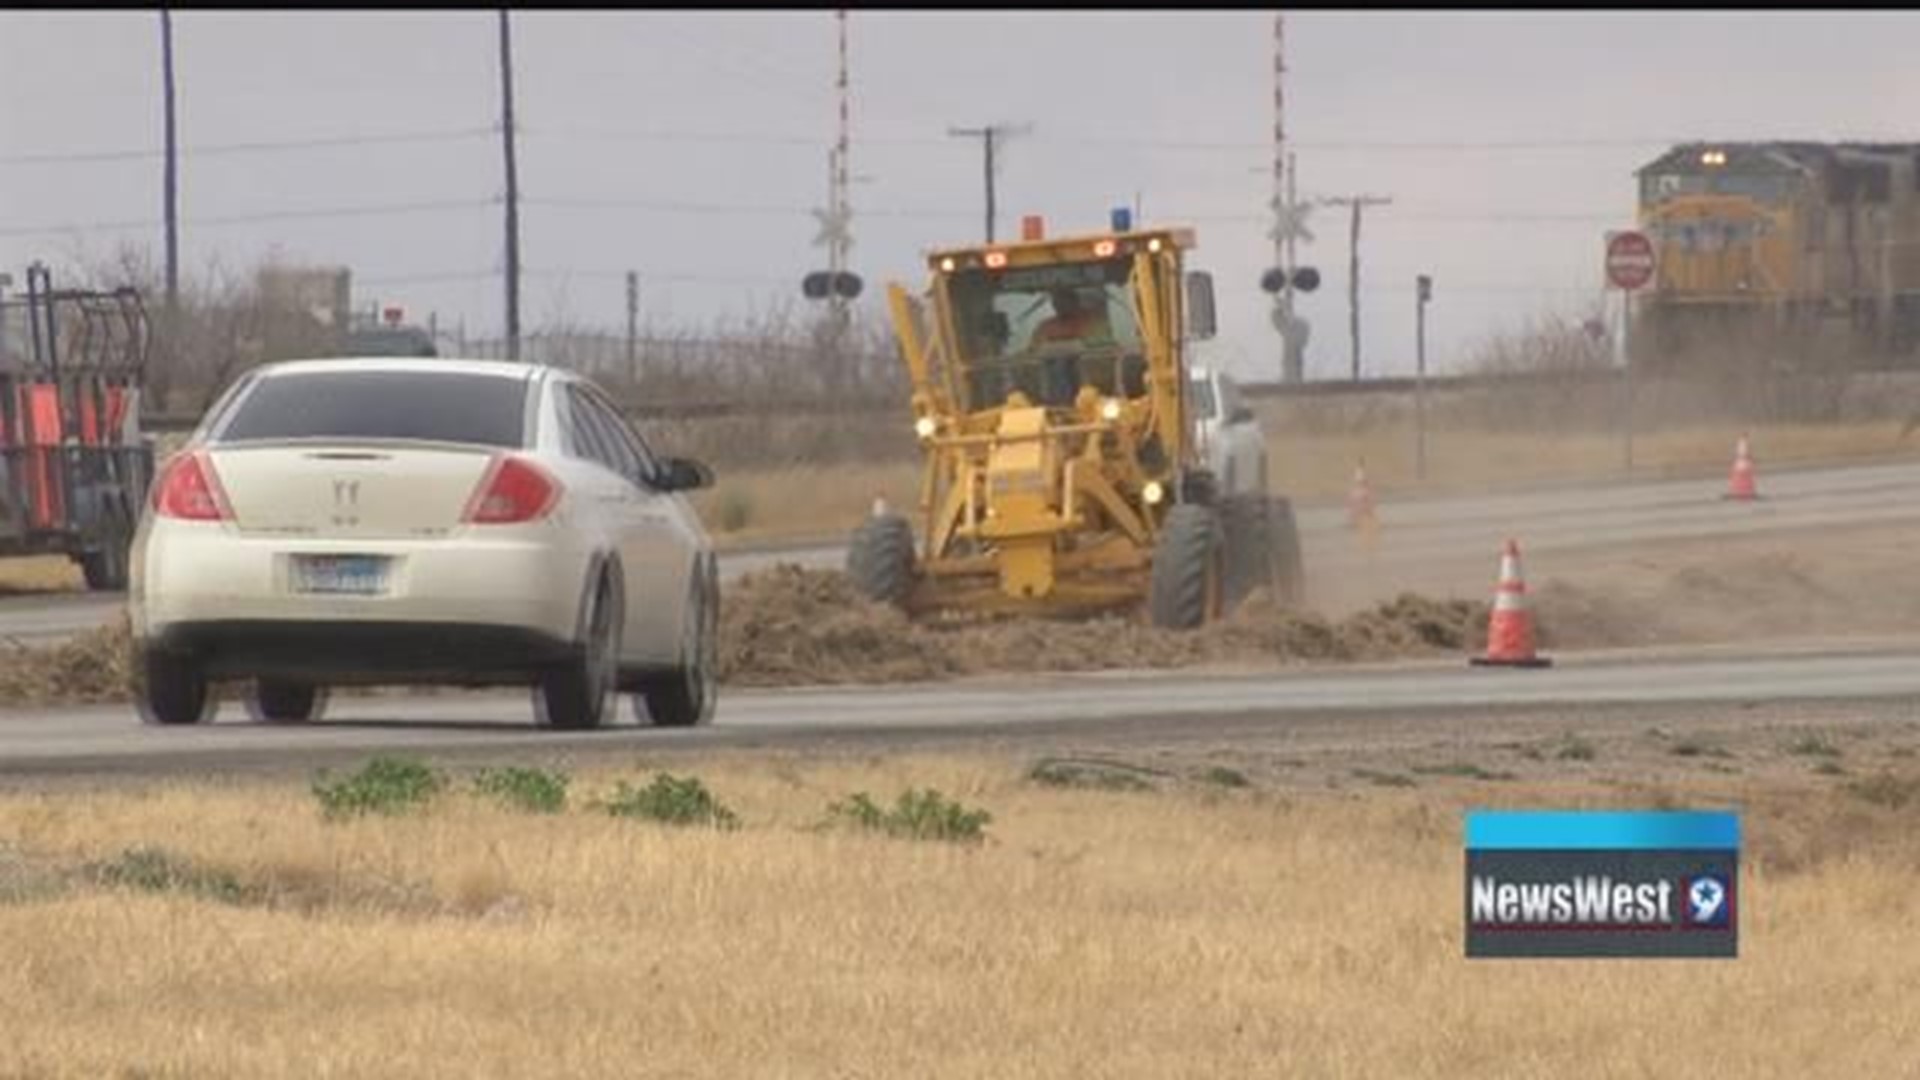 Road work to continue on Business 20 through next week